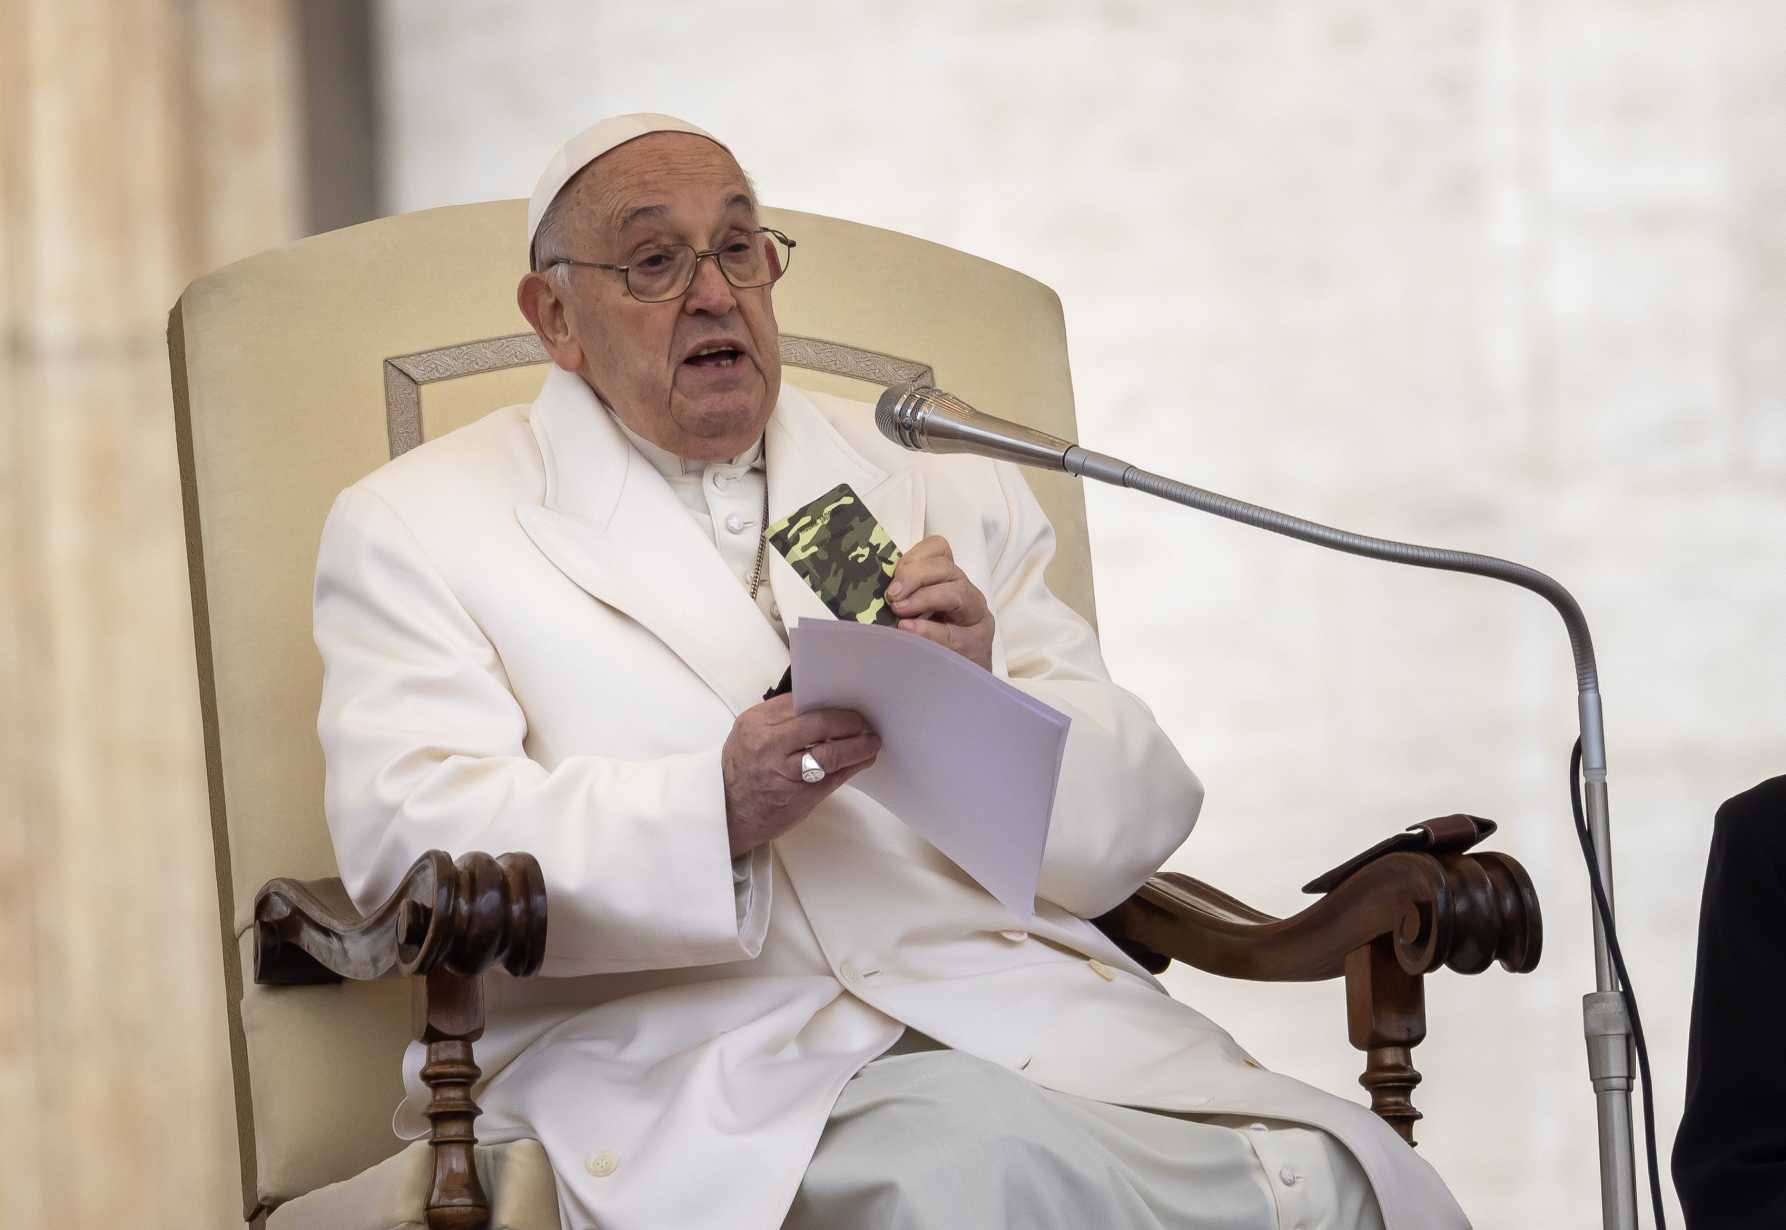 War is 'folly,' pope says as he leads prayers for Ukraine, Gaza